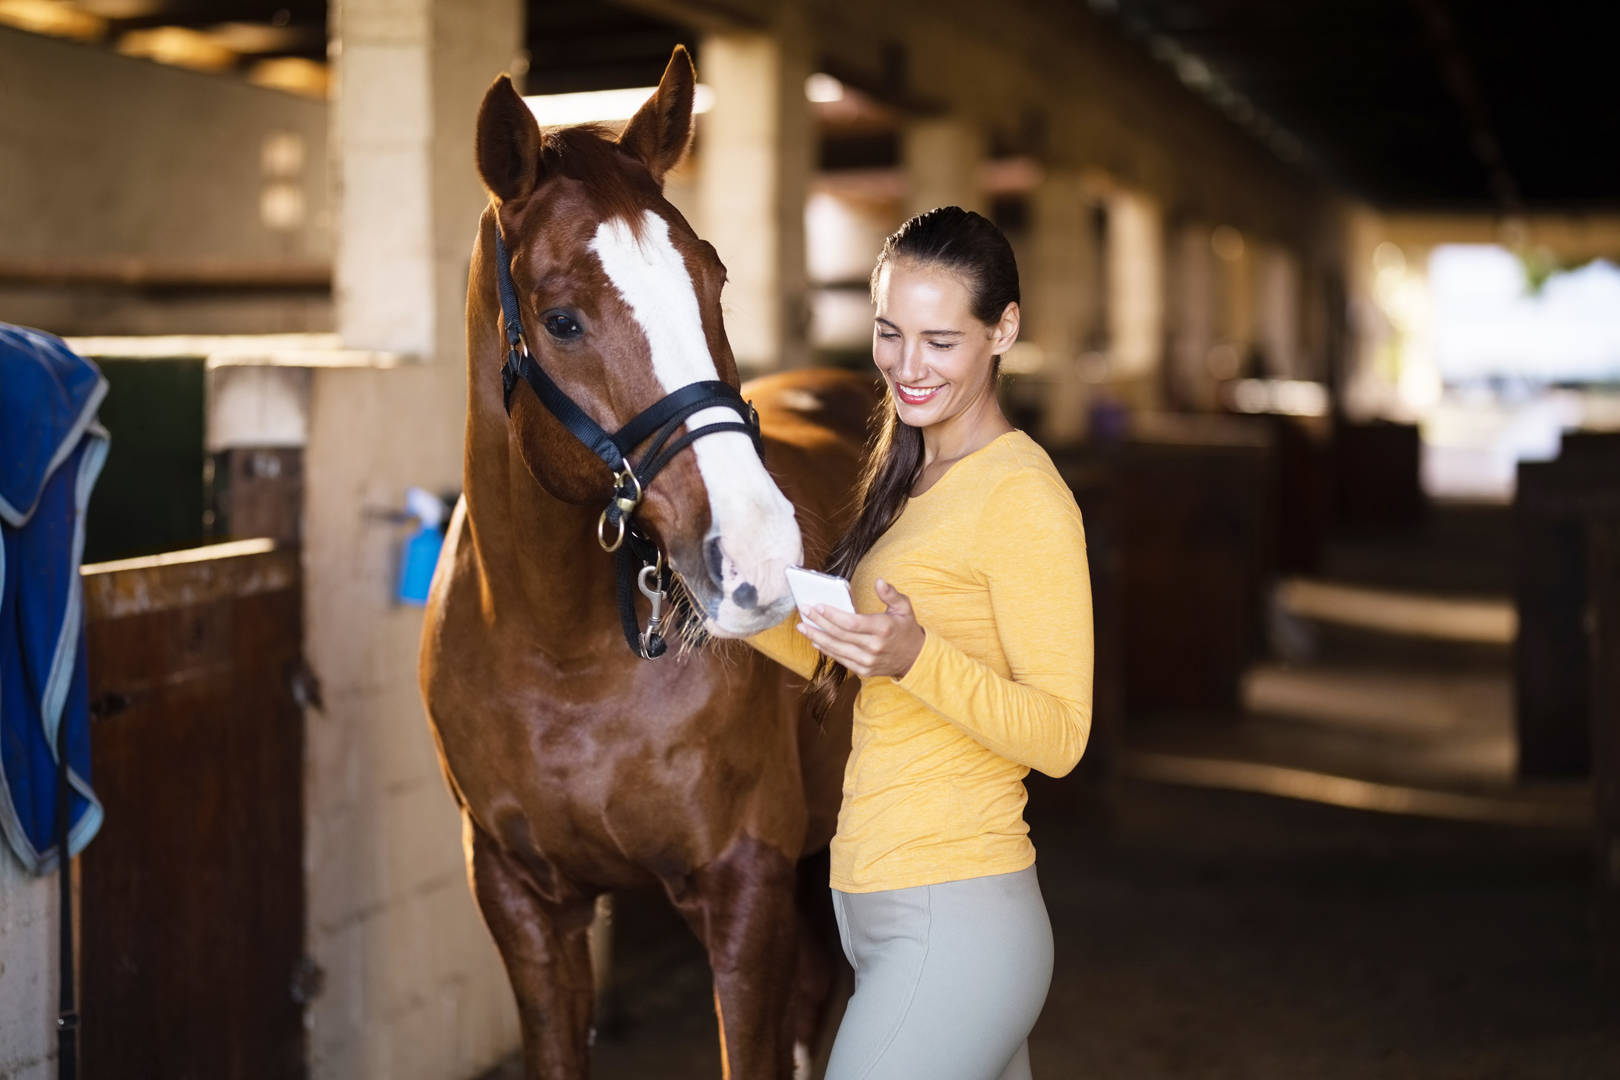 Young woman looks at smartphone and stands next to horse